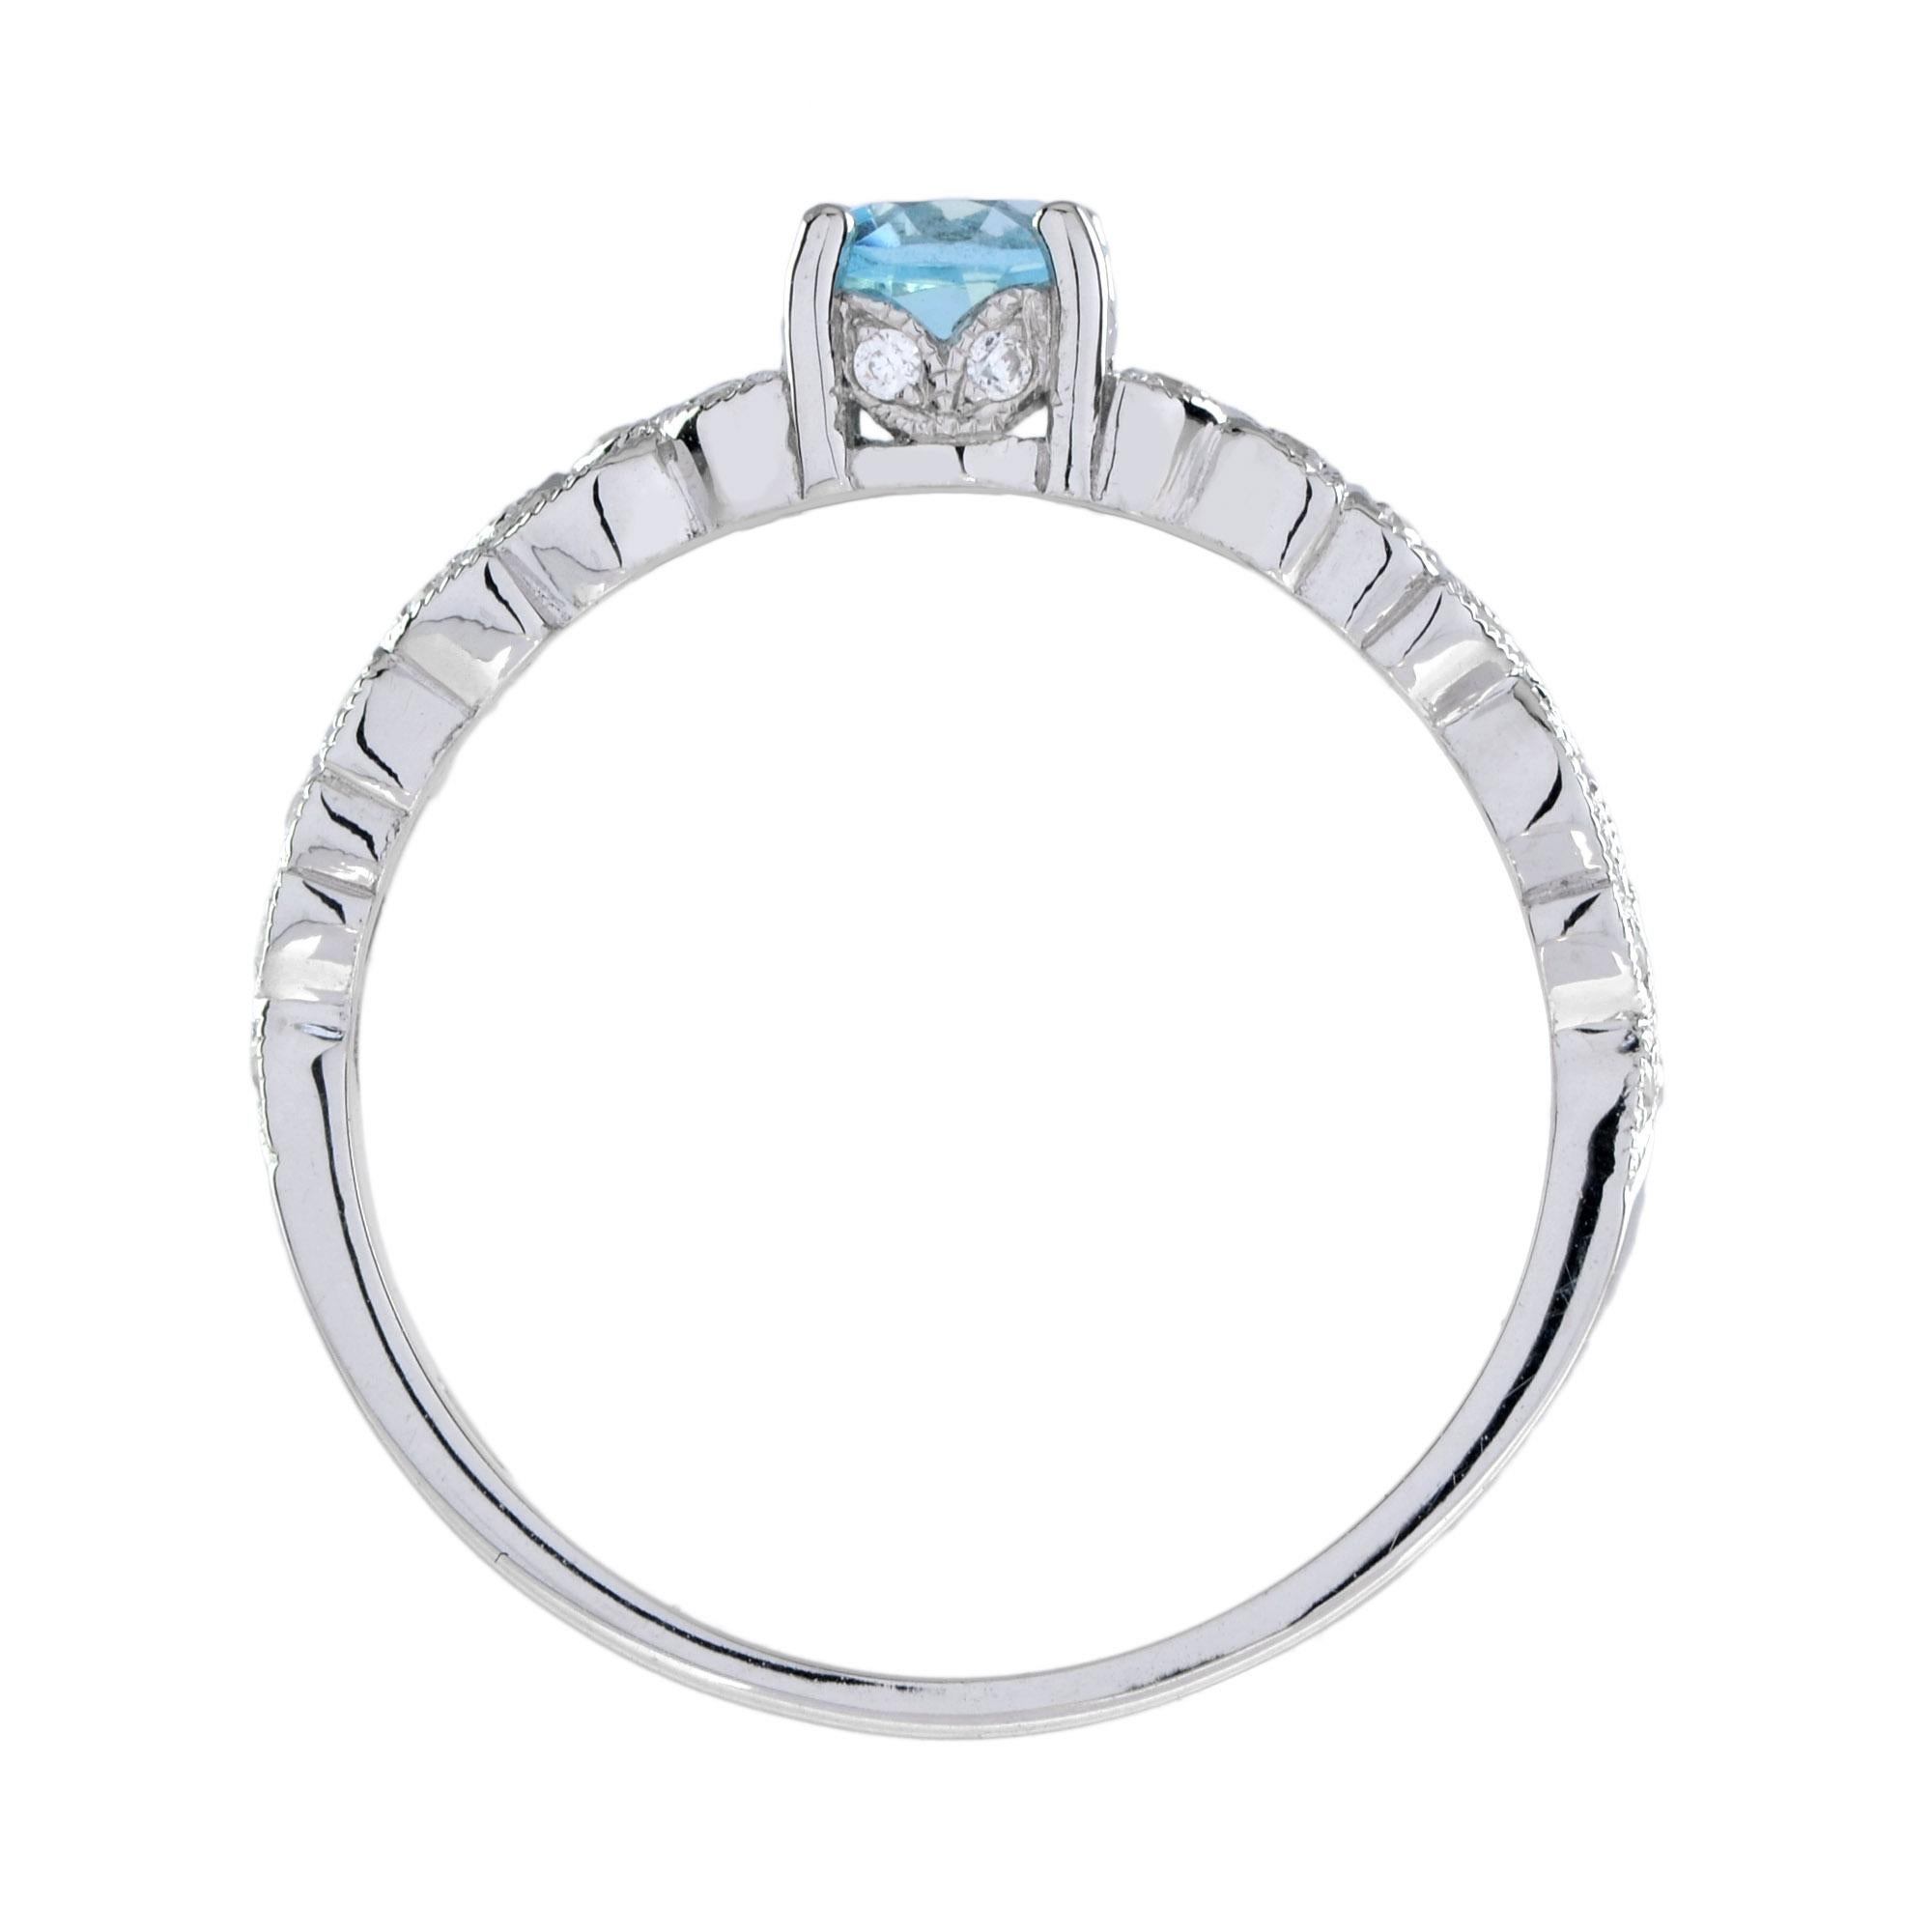 For Sale:  One Round Blue Topaz with Diamond Filigree Band Ring in 14K White Gold 5